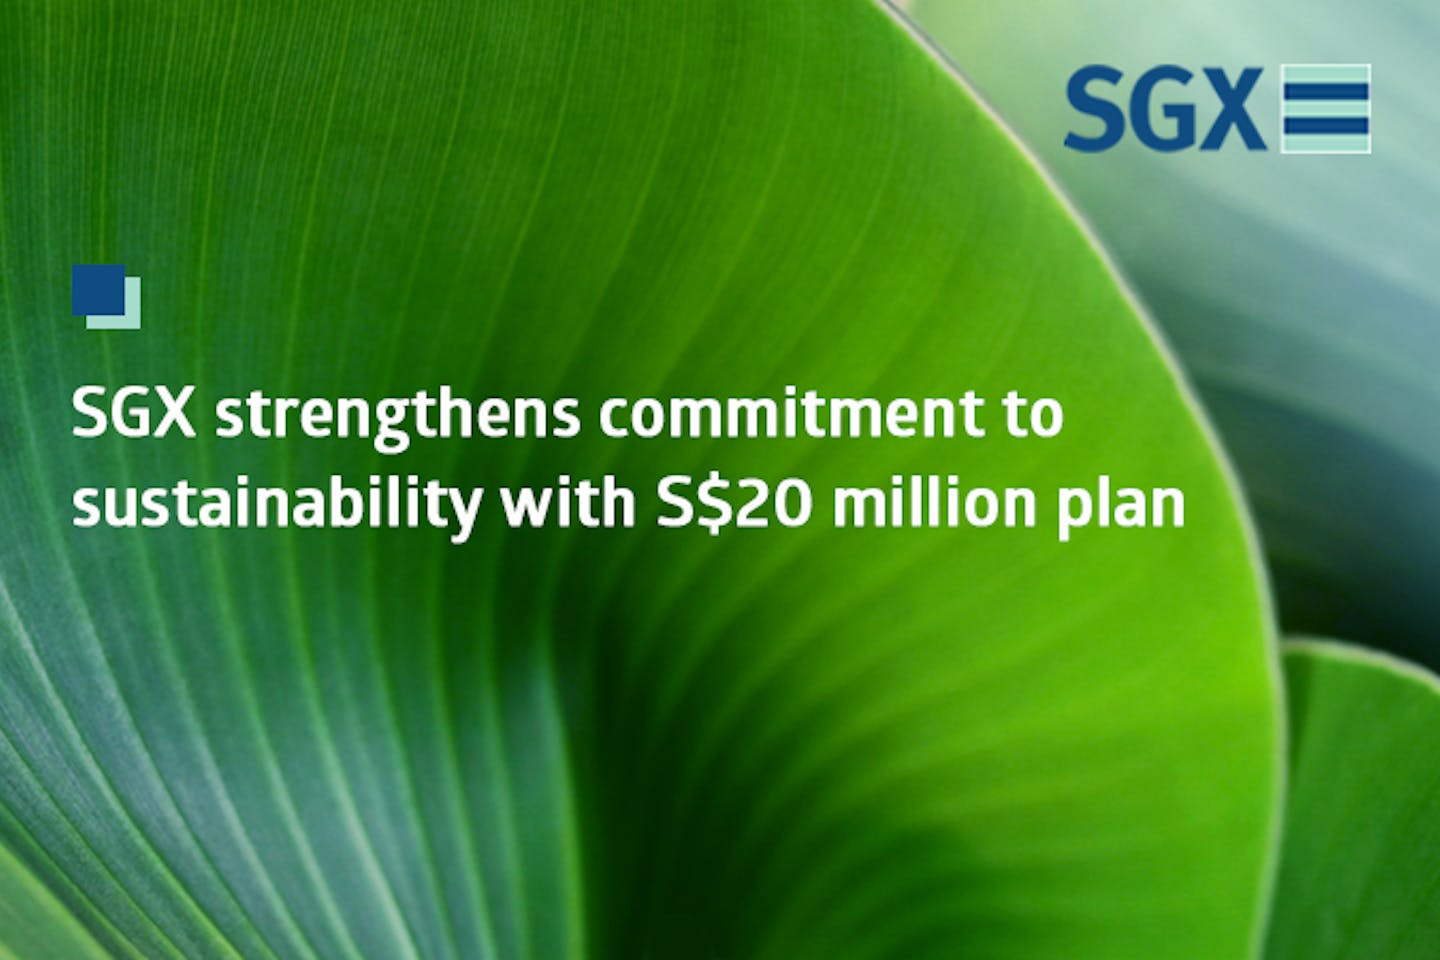 SGX strengthens commitment to sustainability with S$20 million plan